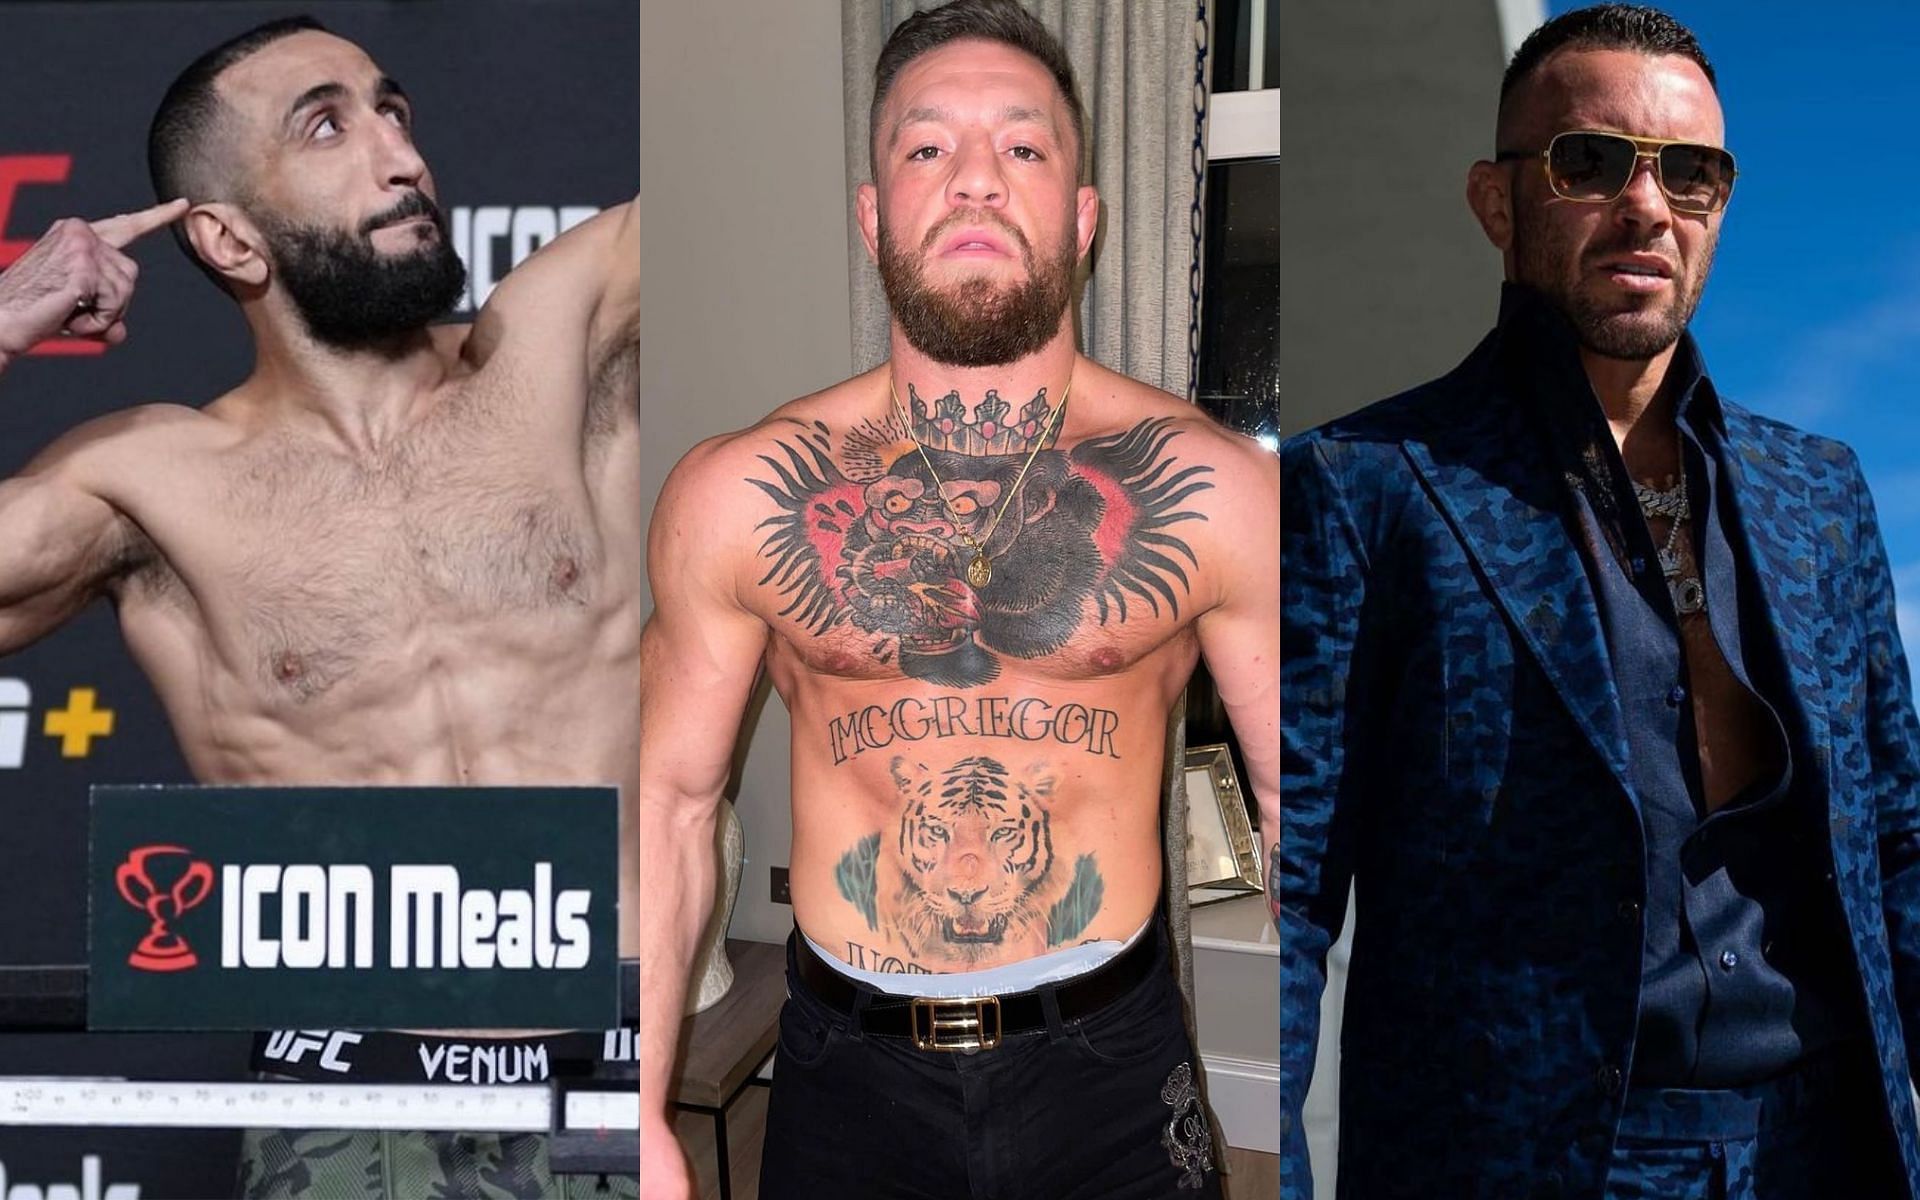 (L to R) Belal Muhammad, Conor McGregor, and Colby Covington [Images via @bullyb170, @thenotoriousmma, and @colbycovmma on Instagram]